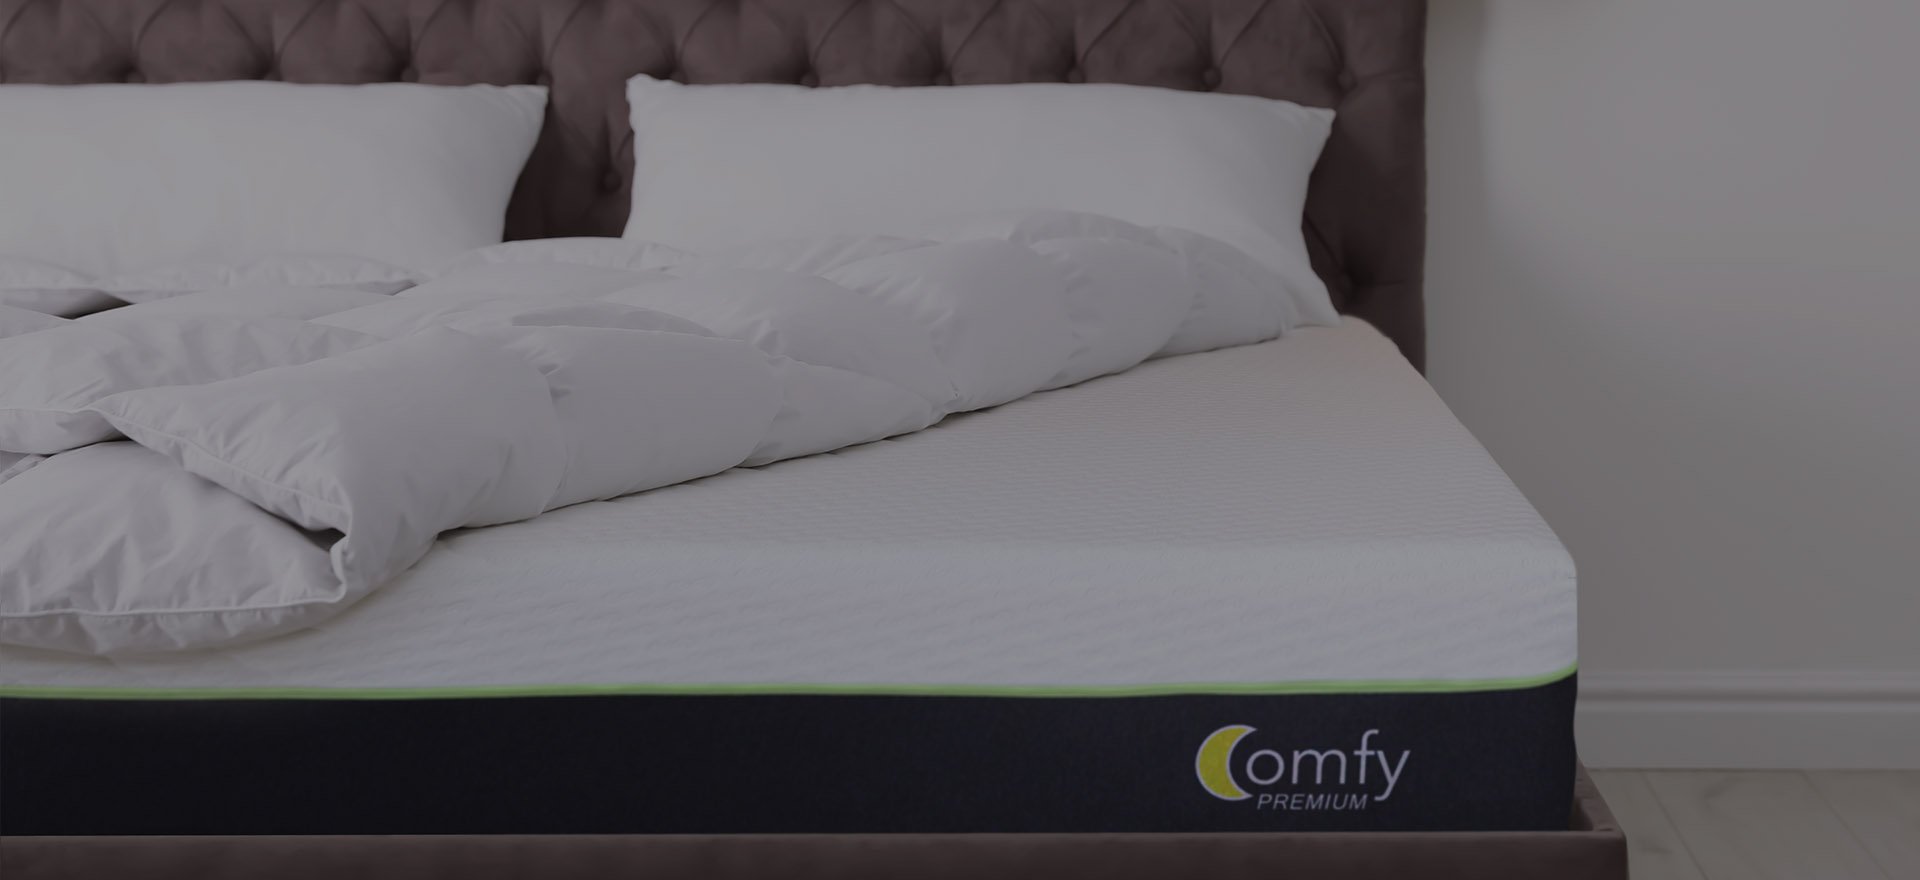 The Comfy Mattress Review